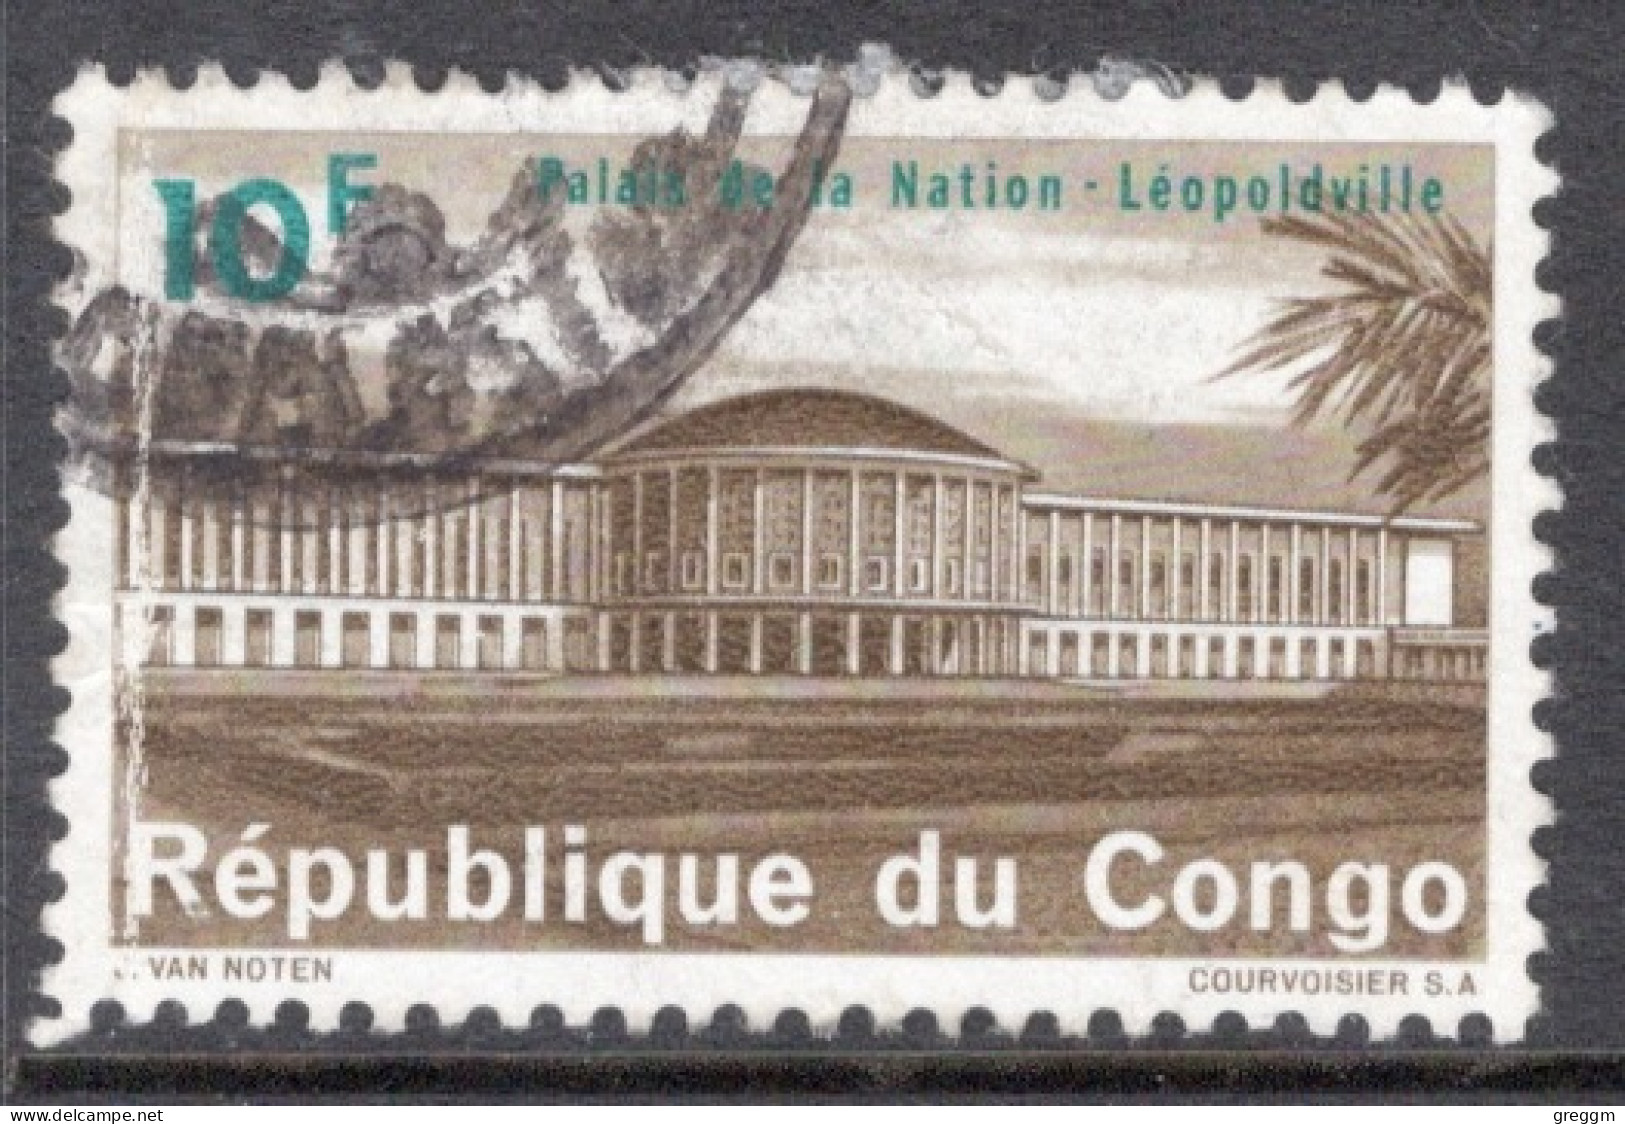 Kinshasa Congo 1964 Single 10f Stamp From The Definitive Set  National Palace, Leopoldville  In Fine Used. - Oblitérés